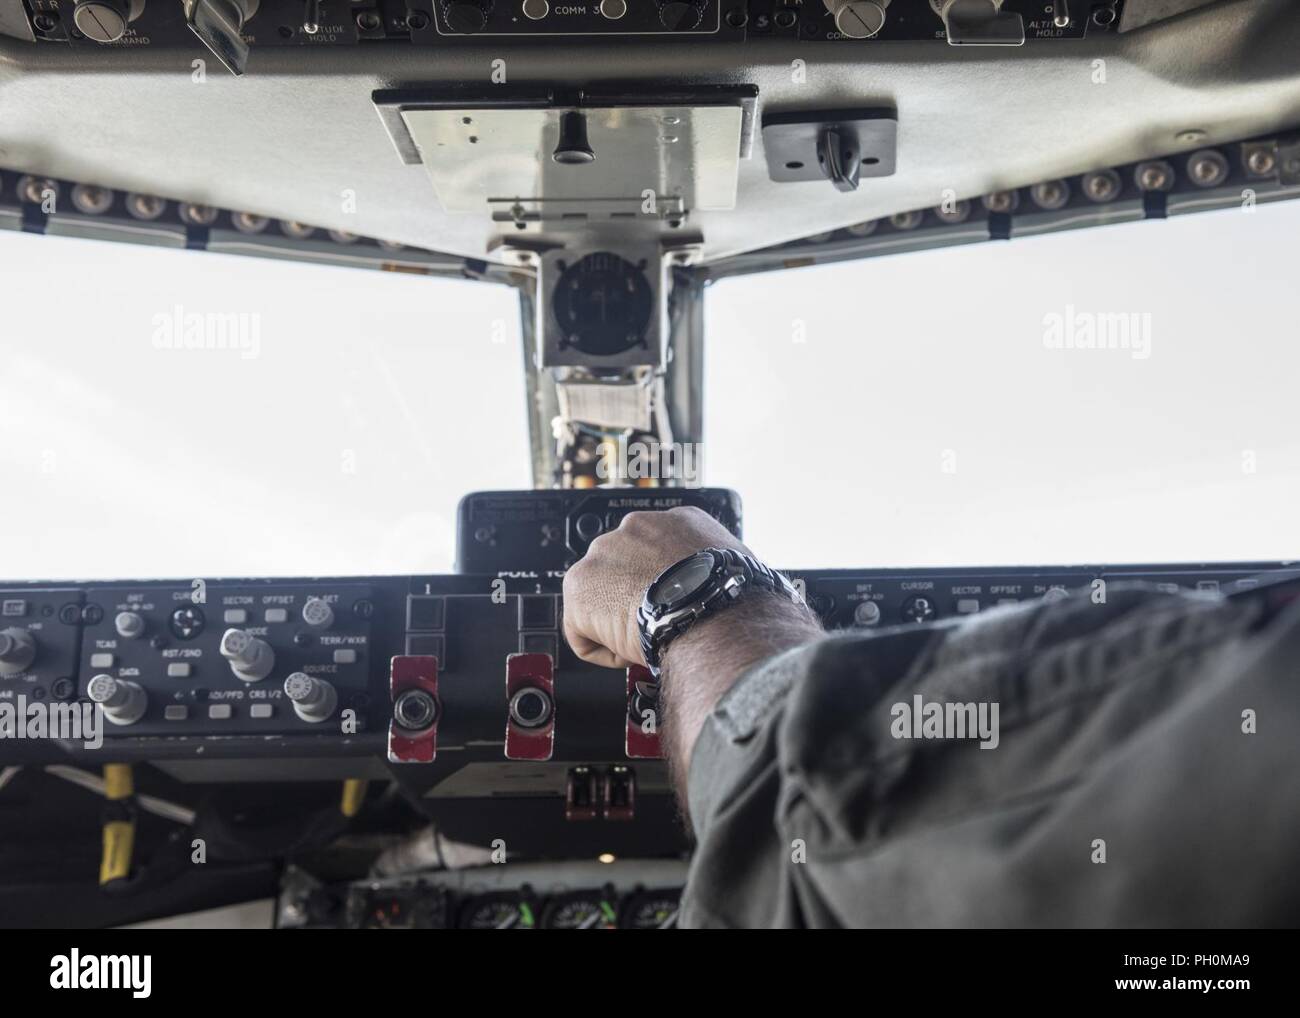 A U.S. Air National Guard pilot from the 121st Air Refueling Wing, Ohio adjusts the controls in the cockpit of a KC-135 Stratotanker after takeoff from Rickenbacker Air National Guard Base, Ohio June 15, 2018.  The Stratotanker was en route to do a refueling exercise over the Atlantic Ocean. Stock Photo